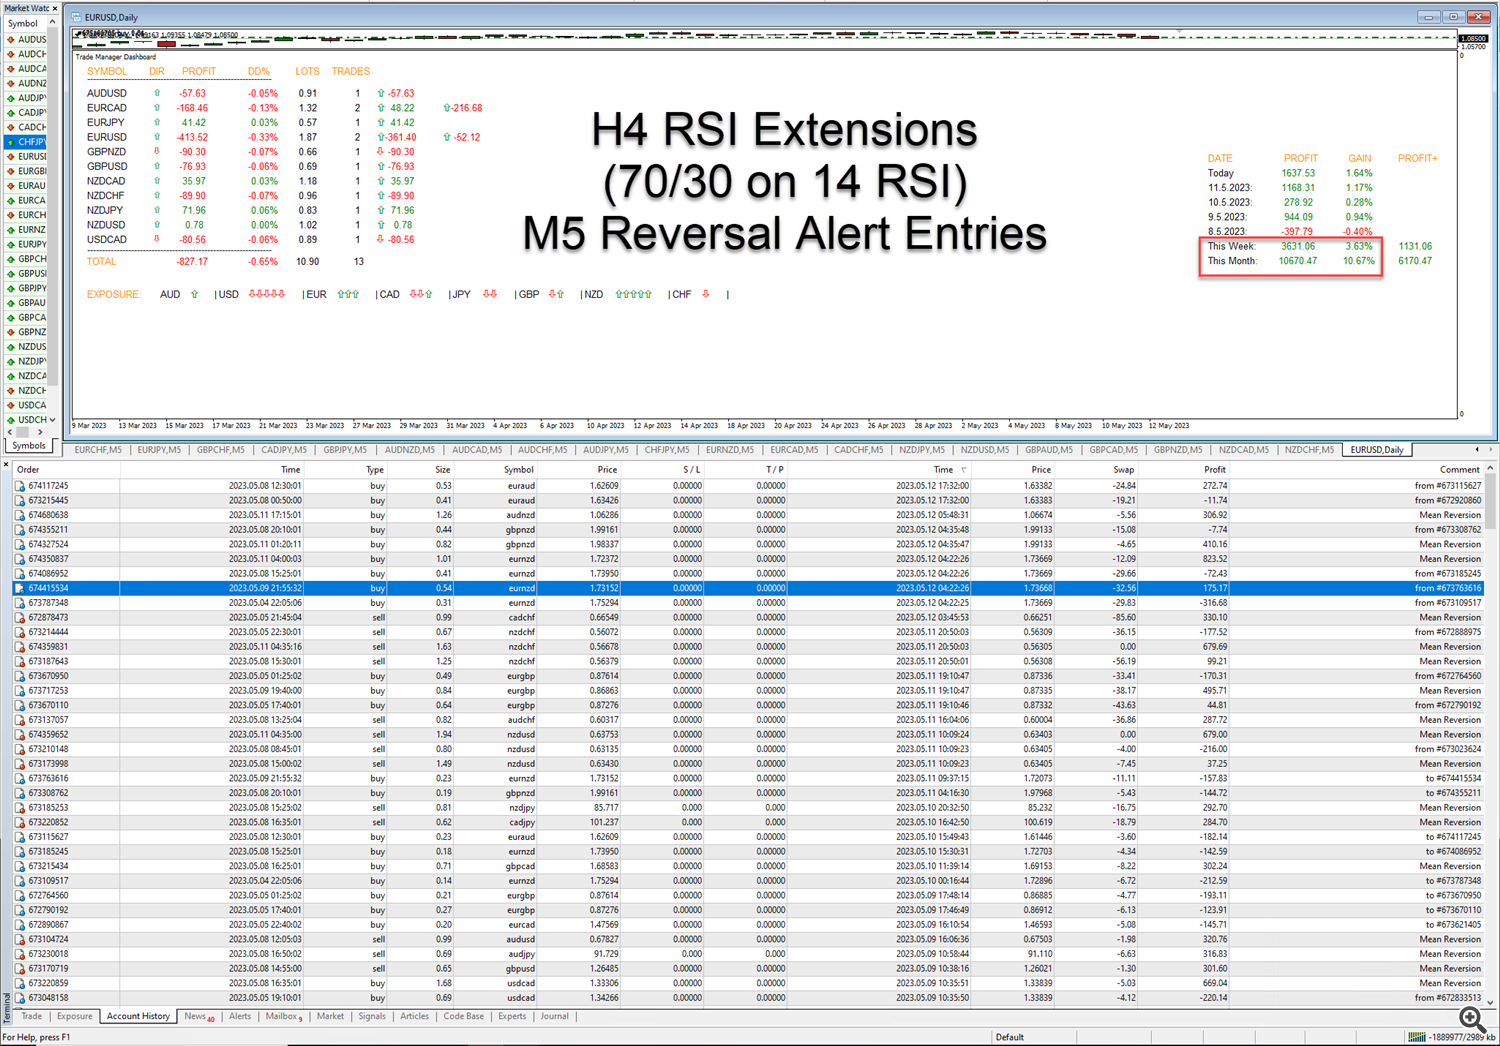 H4 RSI Mean Reversion Strategy